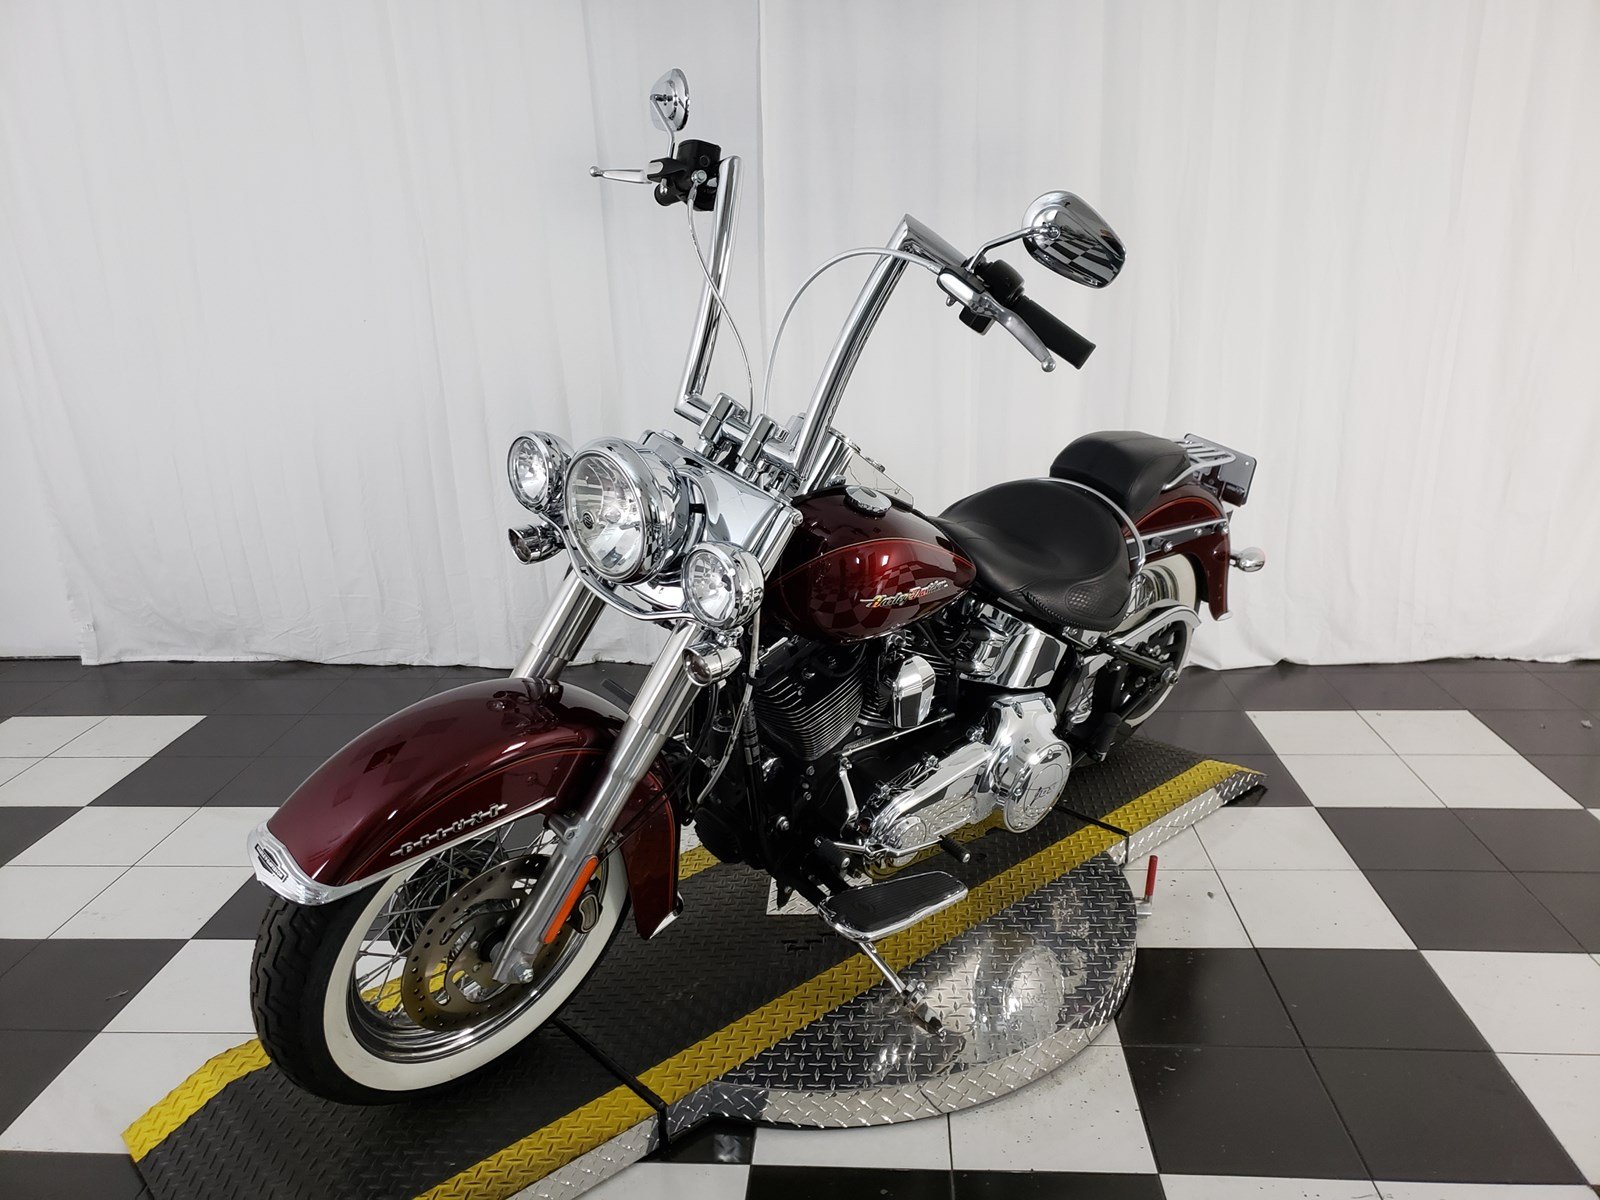 Pre Owned 2016 Harley Davidson Softail Deluxe Flstn Softail In Mesa